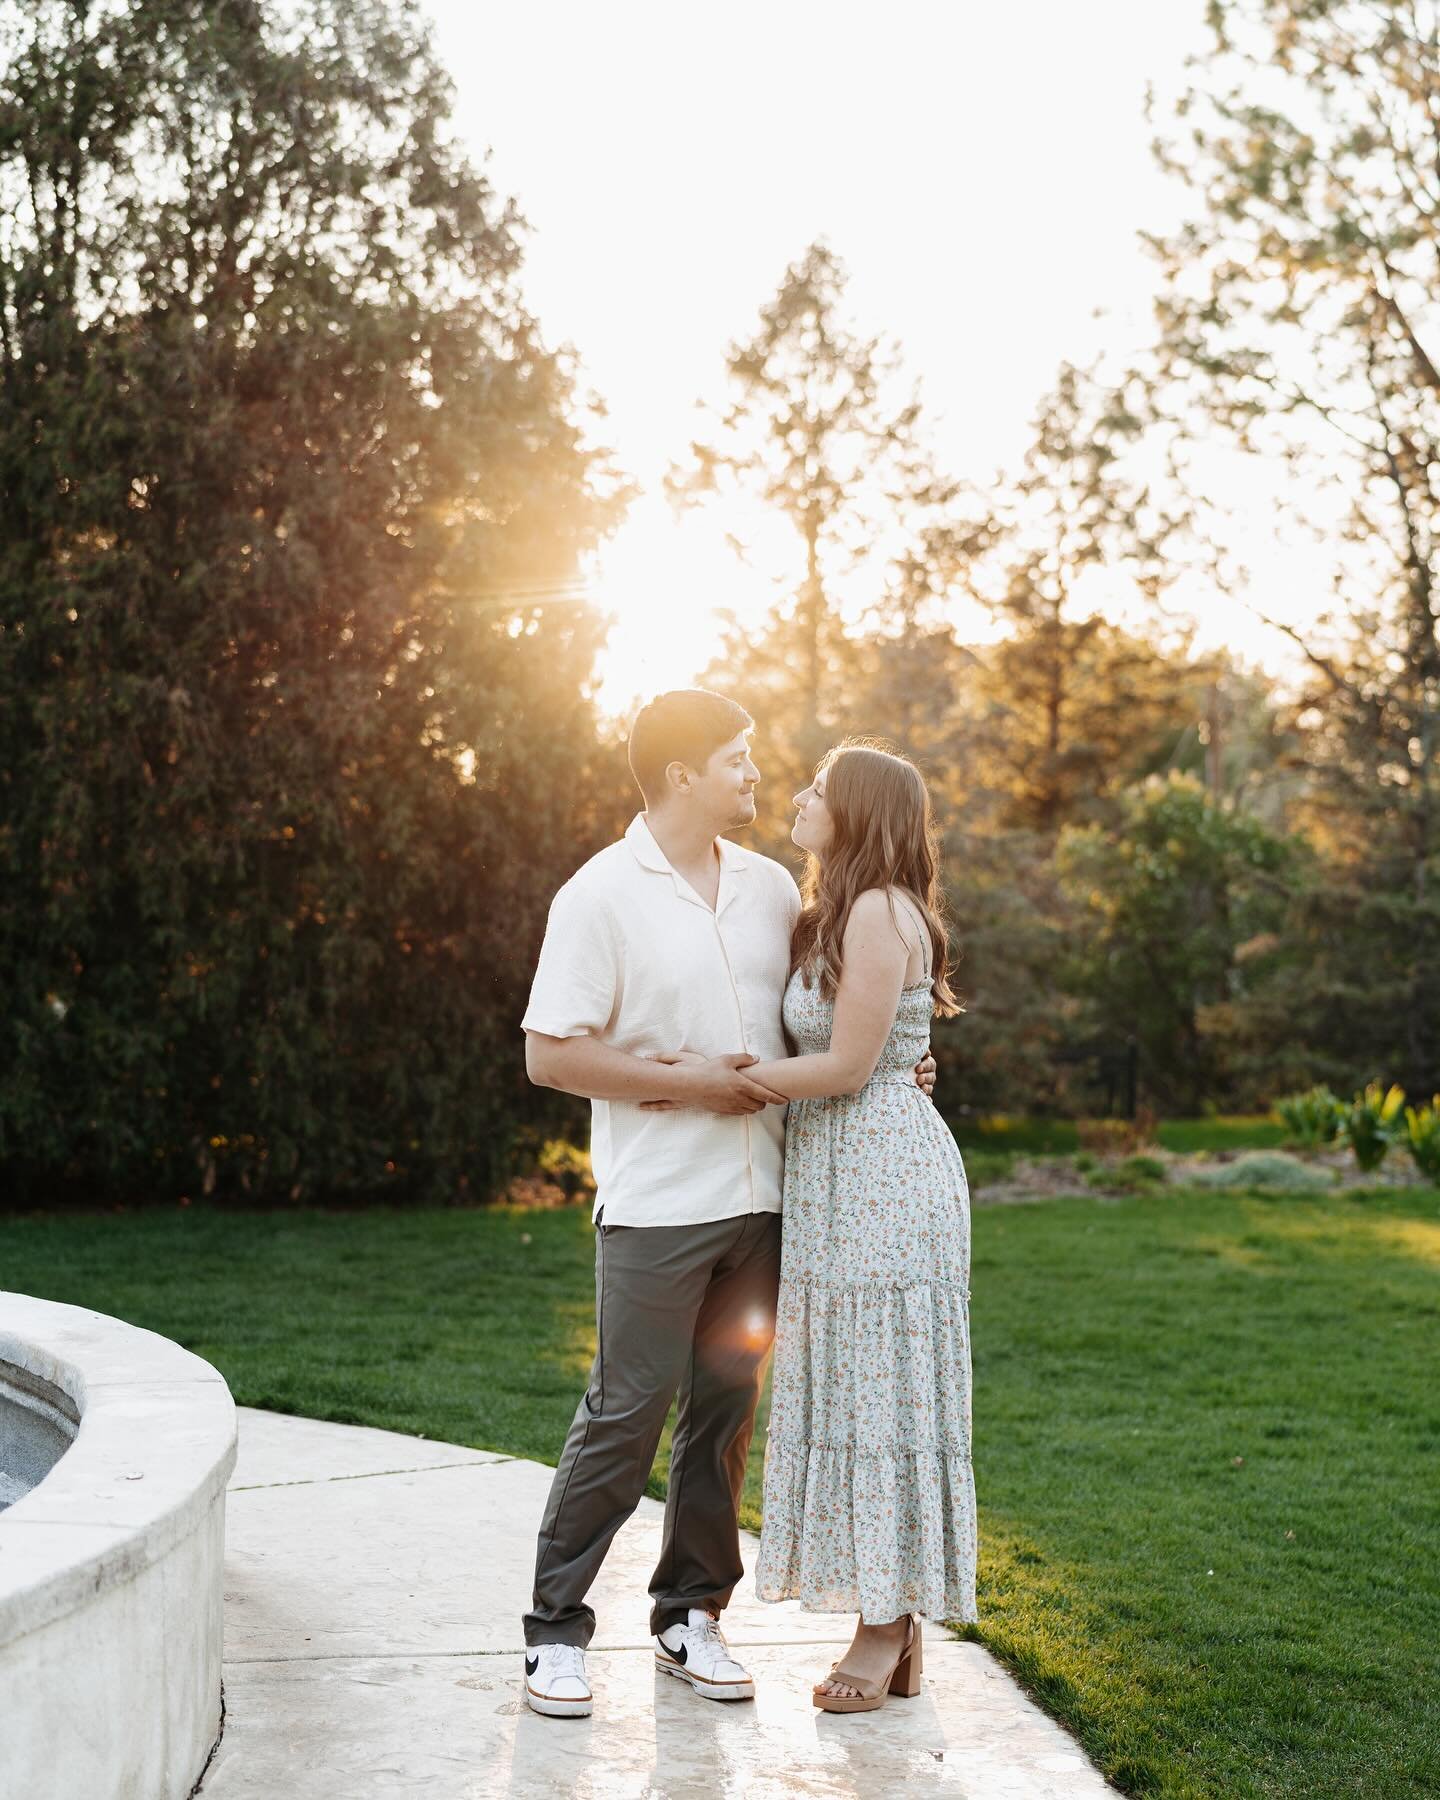 Tonight finally felt like summer and I&rsquo;m so so so excited for it! Erica and Stephen were an absolute dream and I had so much fun during their session - be prepared for my upcoming oversharing 🙃